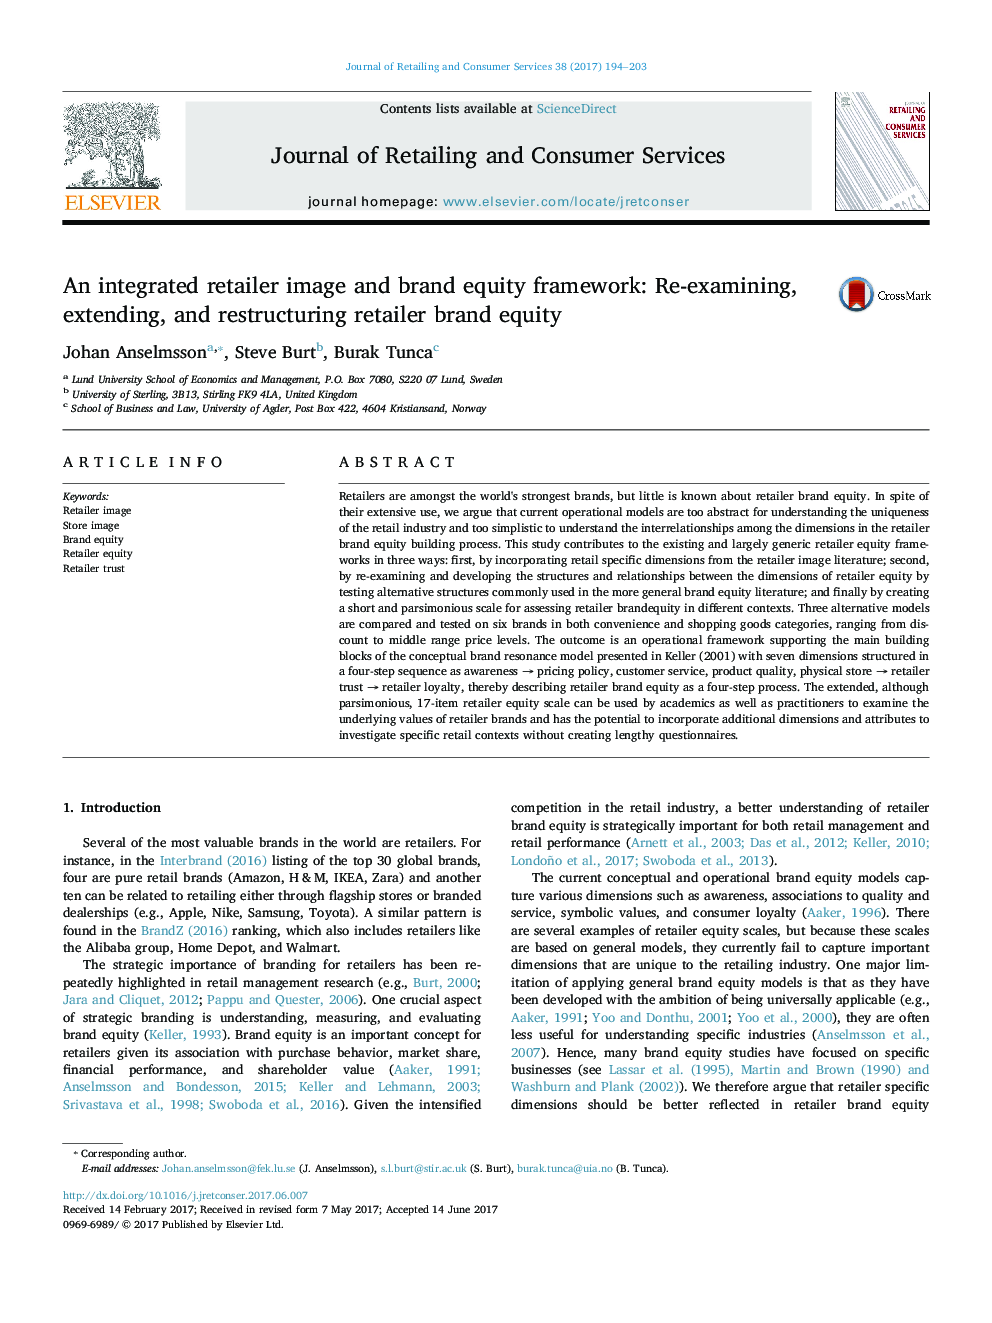 An integrated retailer image and brand equity framework: Re-examining, extending, and restructuring retailer brand equity